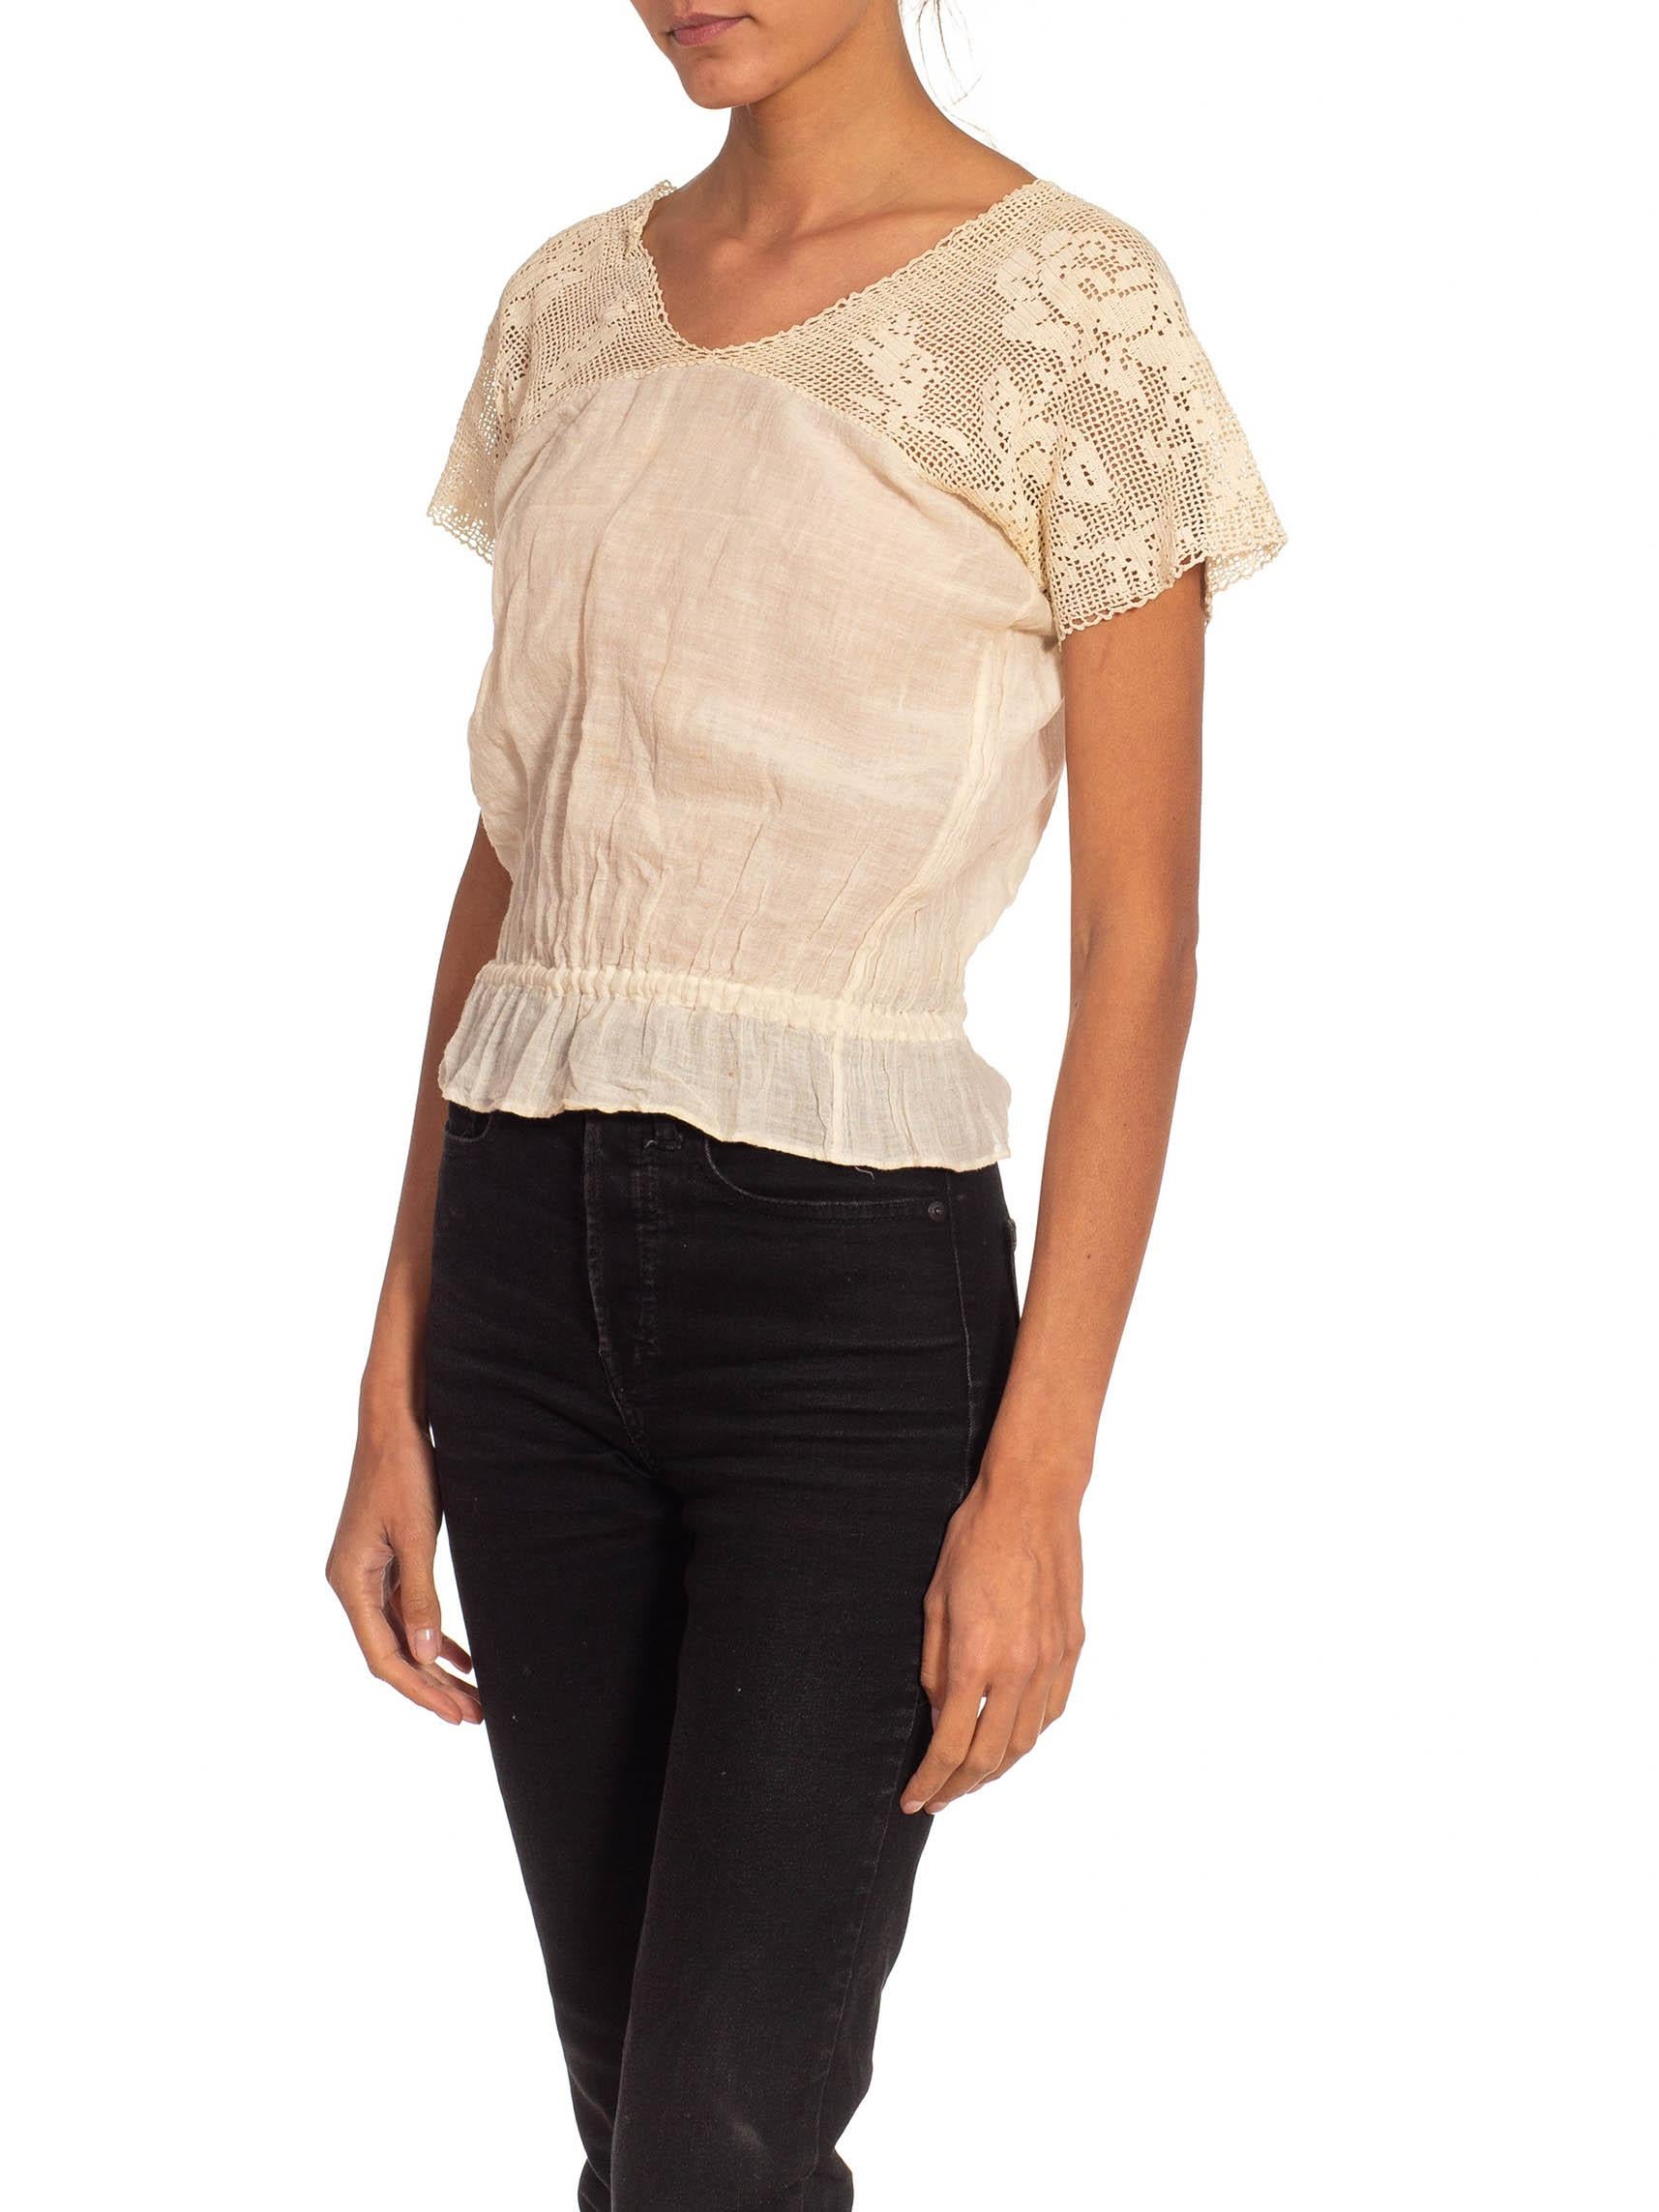 Victorian Off White Cotton Lace Top With Elastic Waist For Sale 4